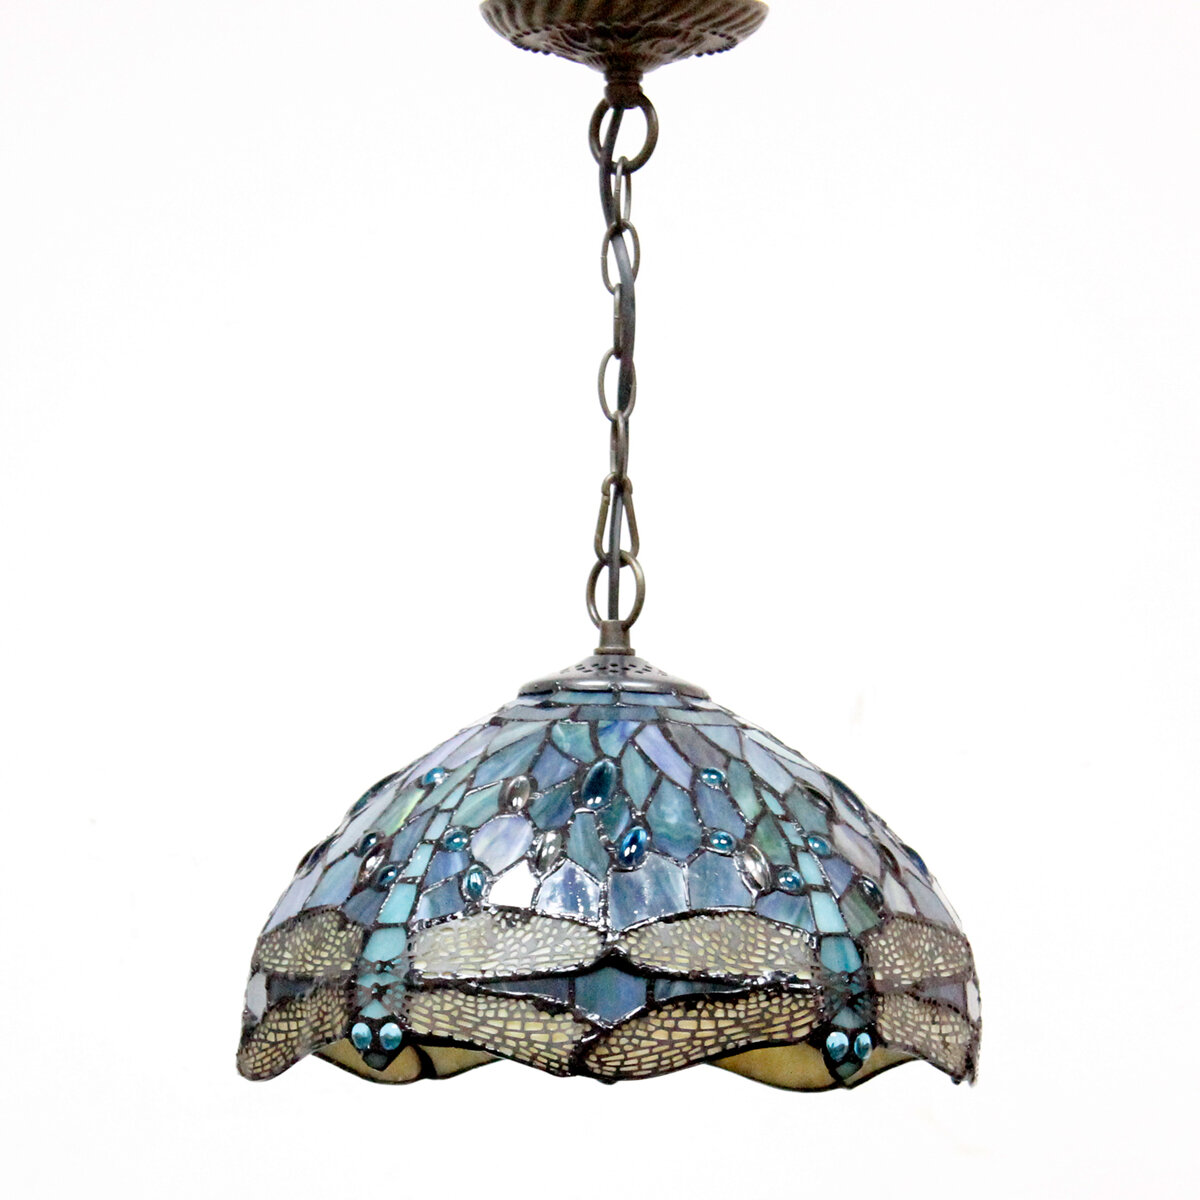 Canora Grey Dragonfly Stained Inch Sea Wide Wayfair Tiffany & 12 Reviews Inch Fixture Lamp Height | Light Glass Turrella 32 Hanging Blue